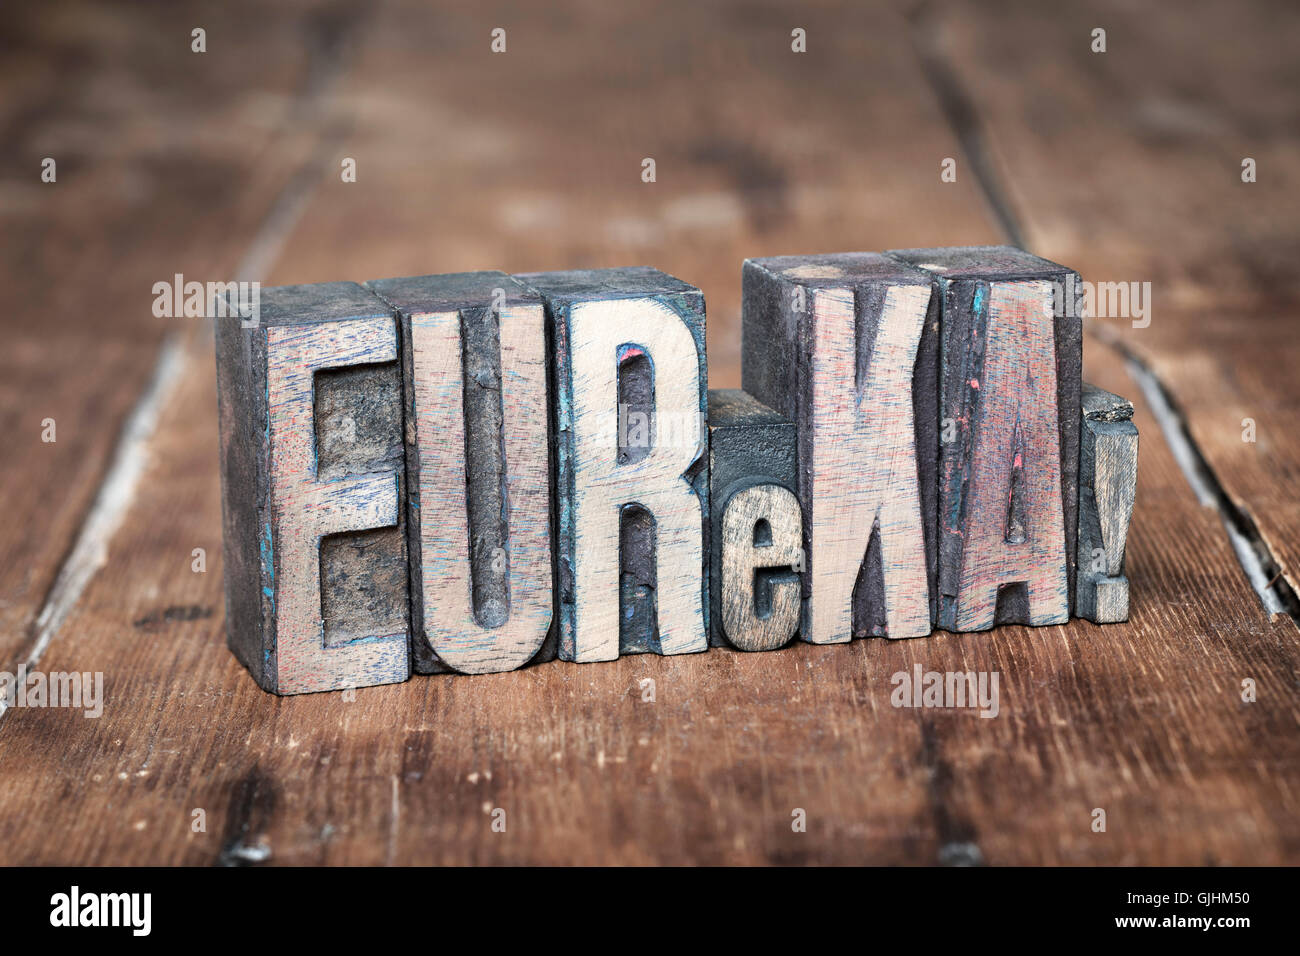 eureka exclamation made from wooden letterpress type on grunge wood Stock Photo